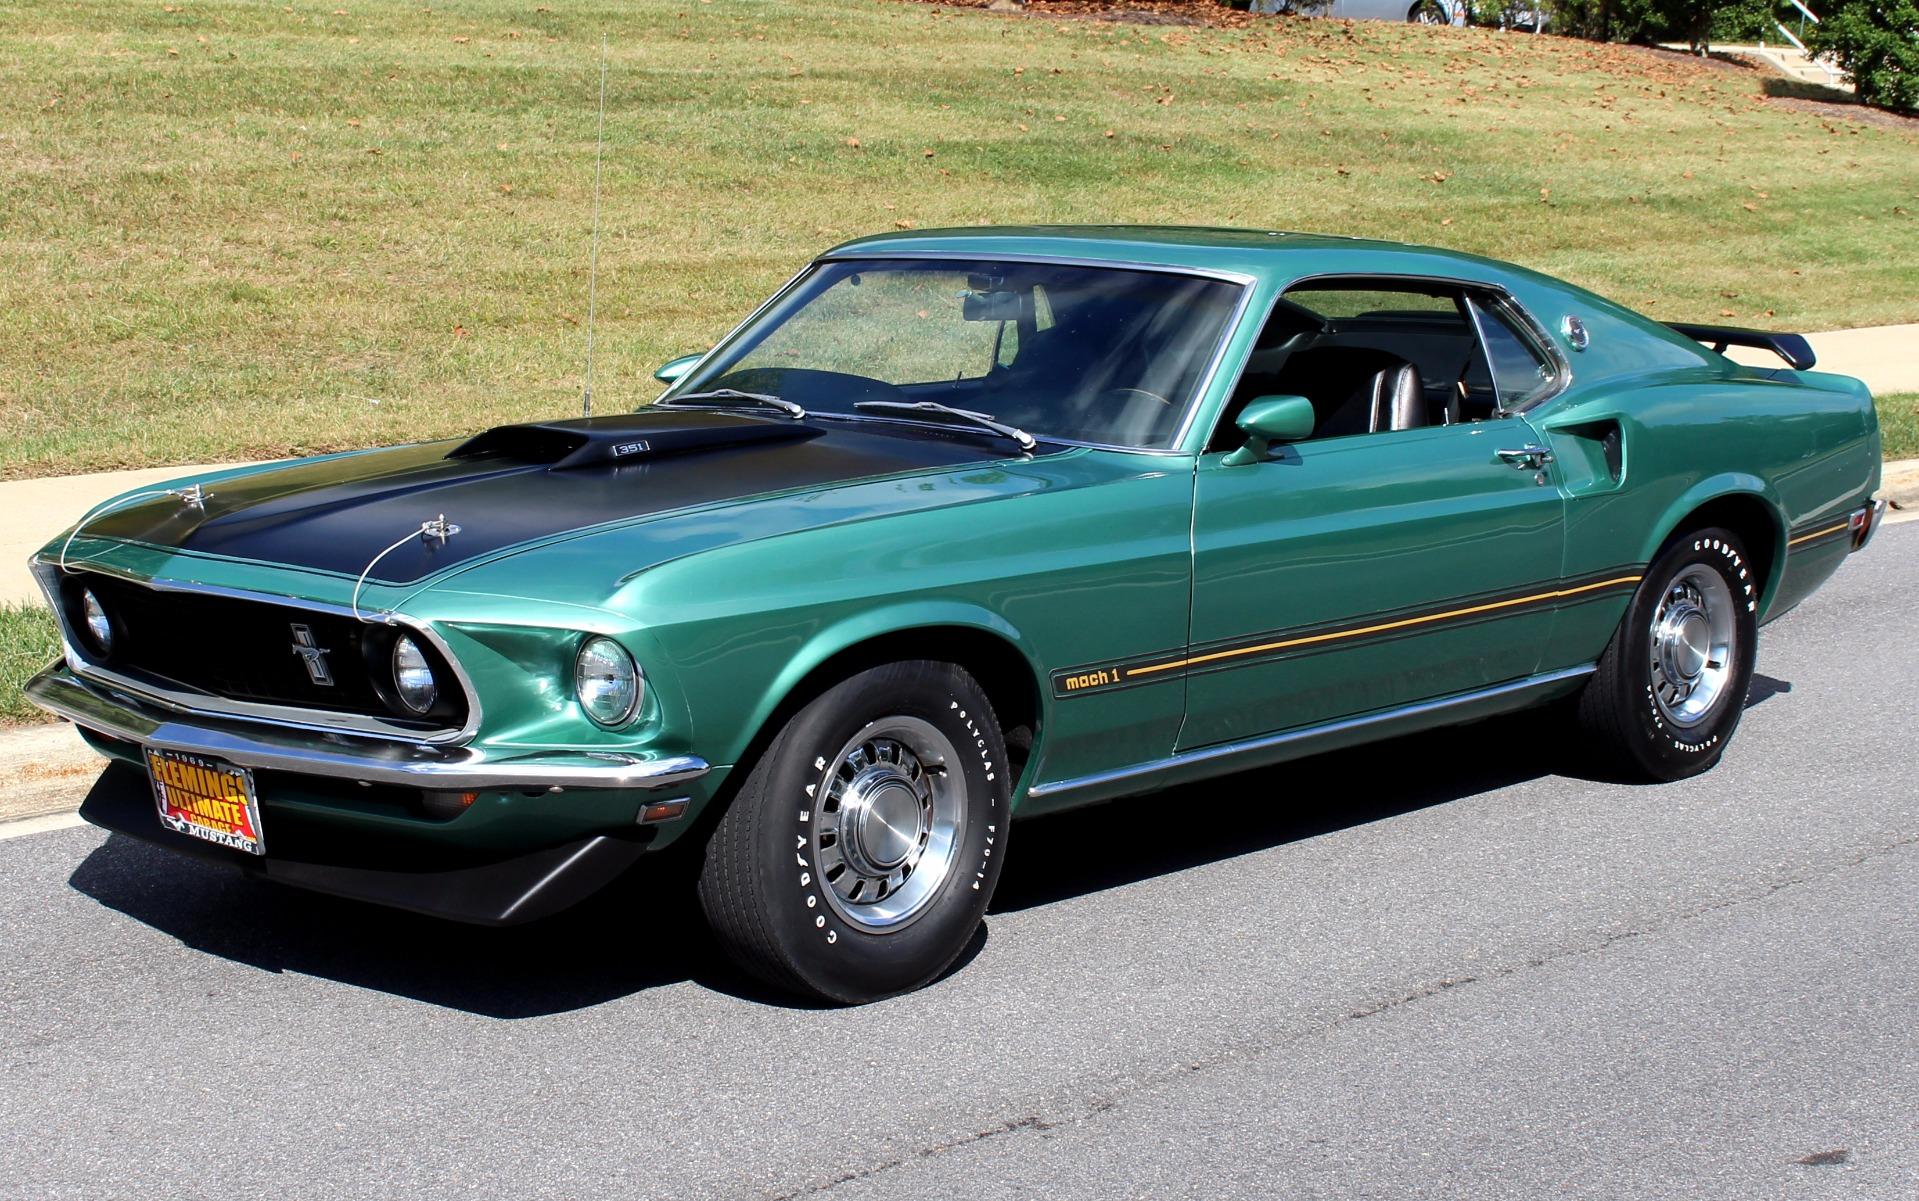 1969 Mustang Mach 1 Paint Colors